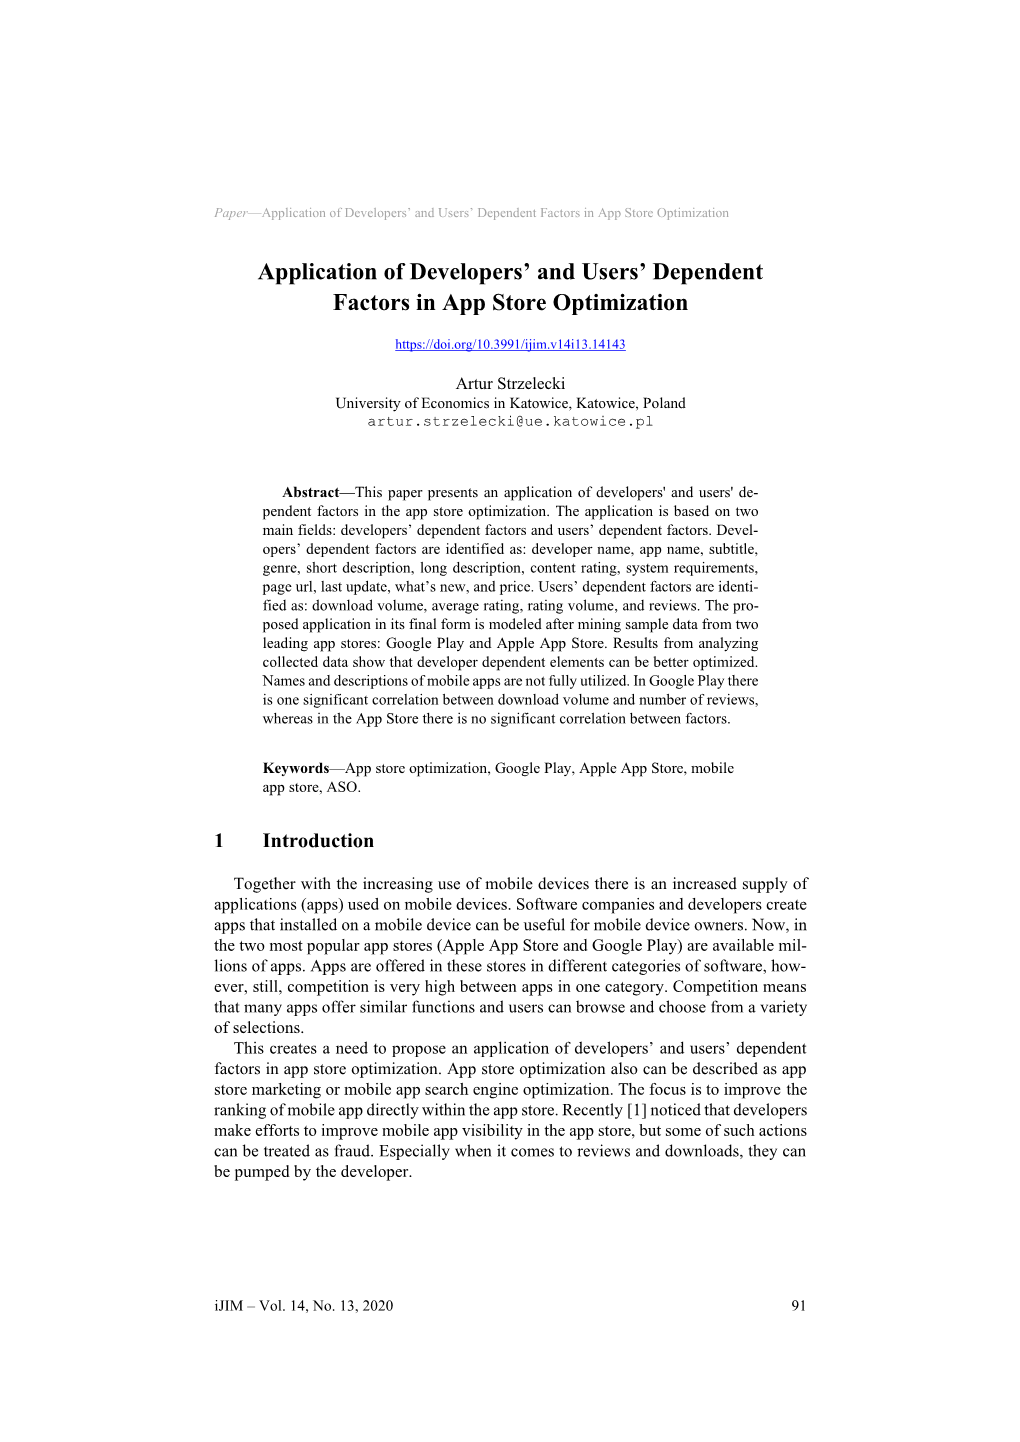 Application of Developers' and Users' Dependent Factors in App Store Optimization